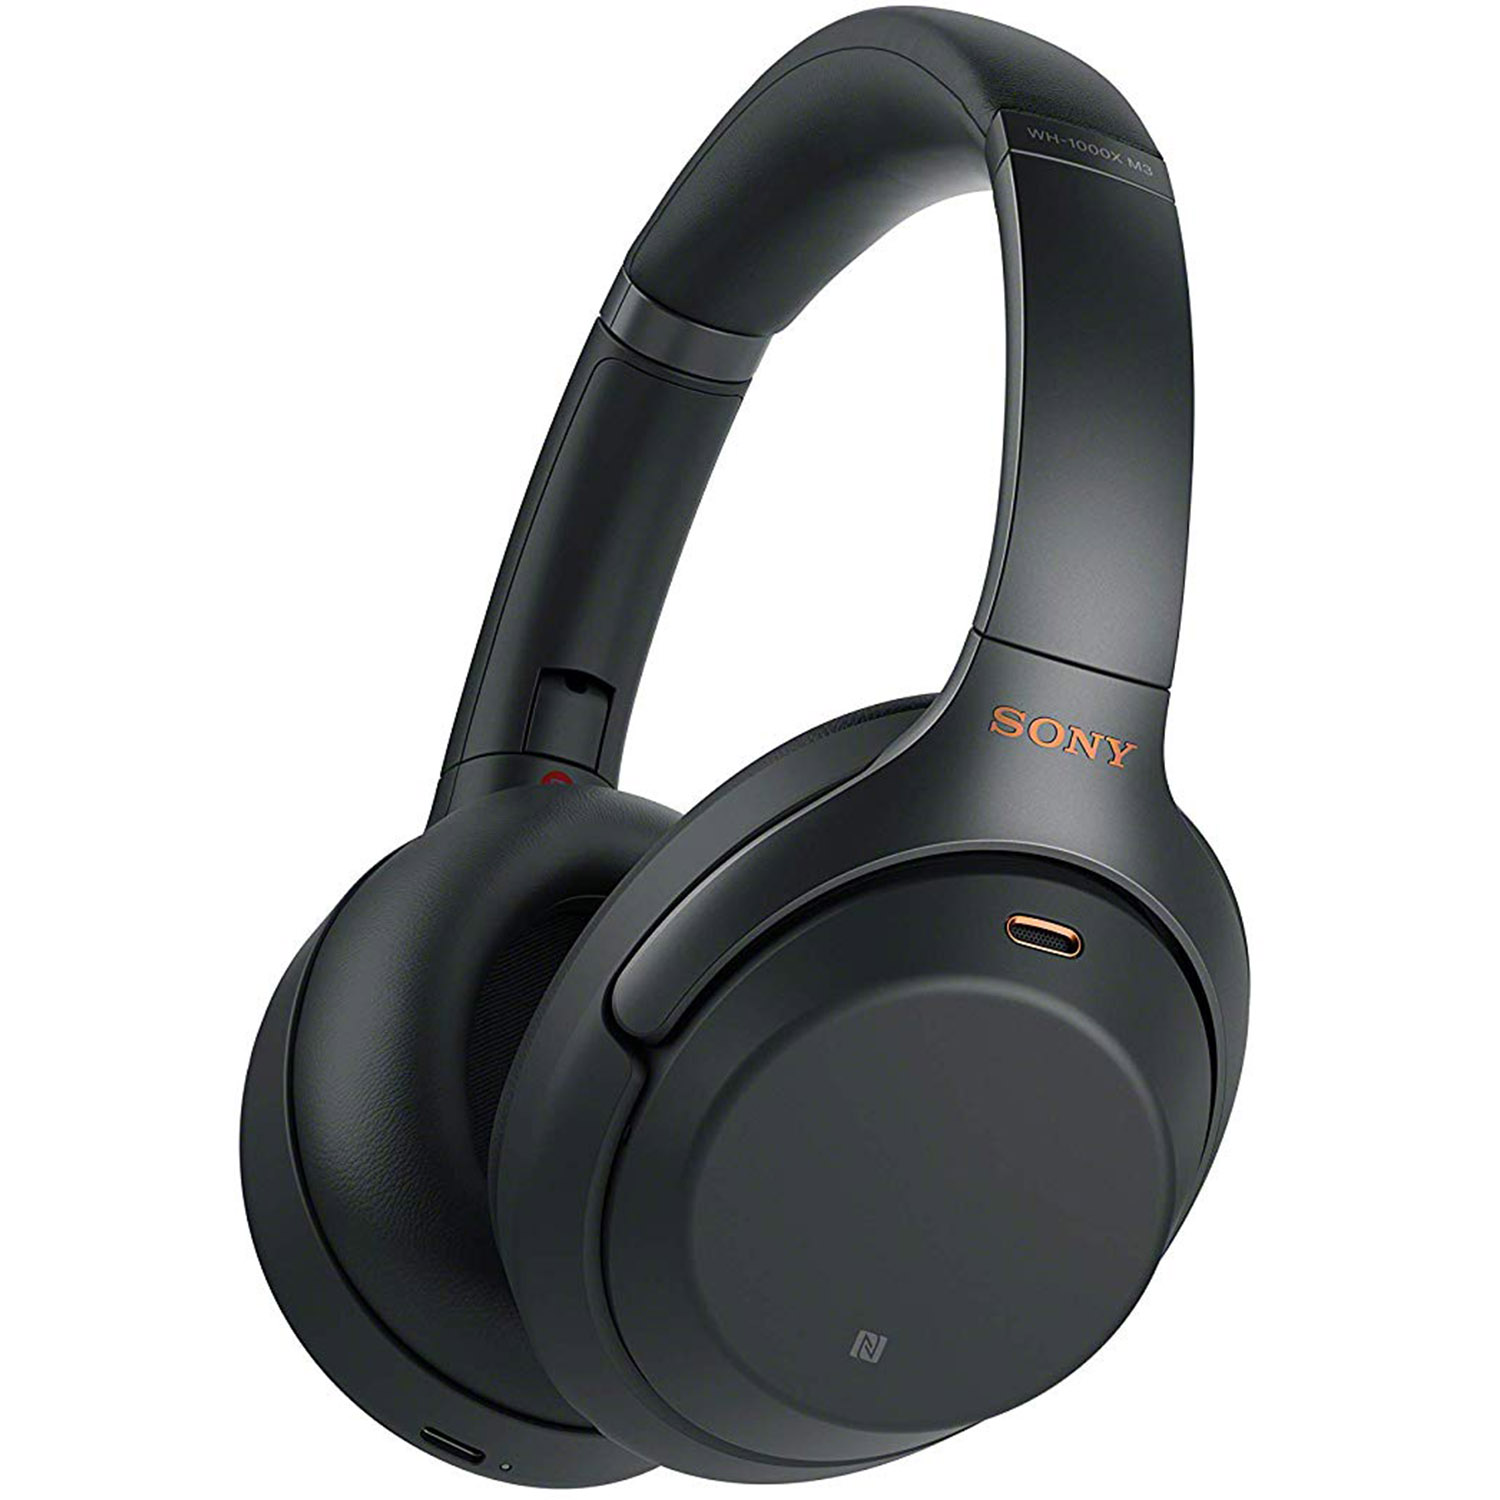 Sony WH-1000XM3 Wireless Noise-Canceling Over-Ear Headphones - image 1 of 3